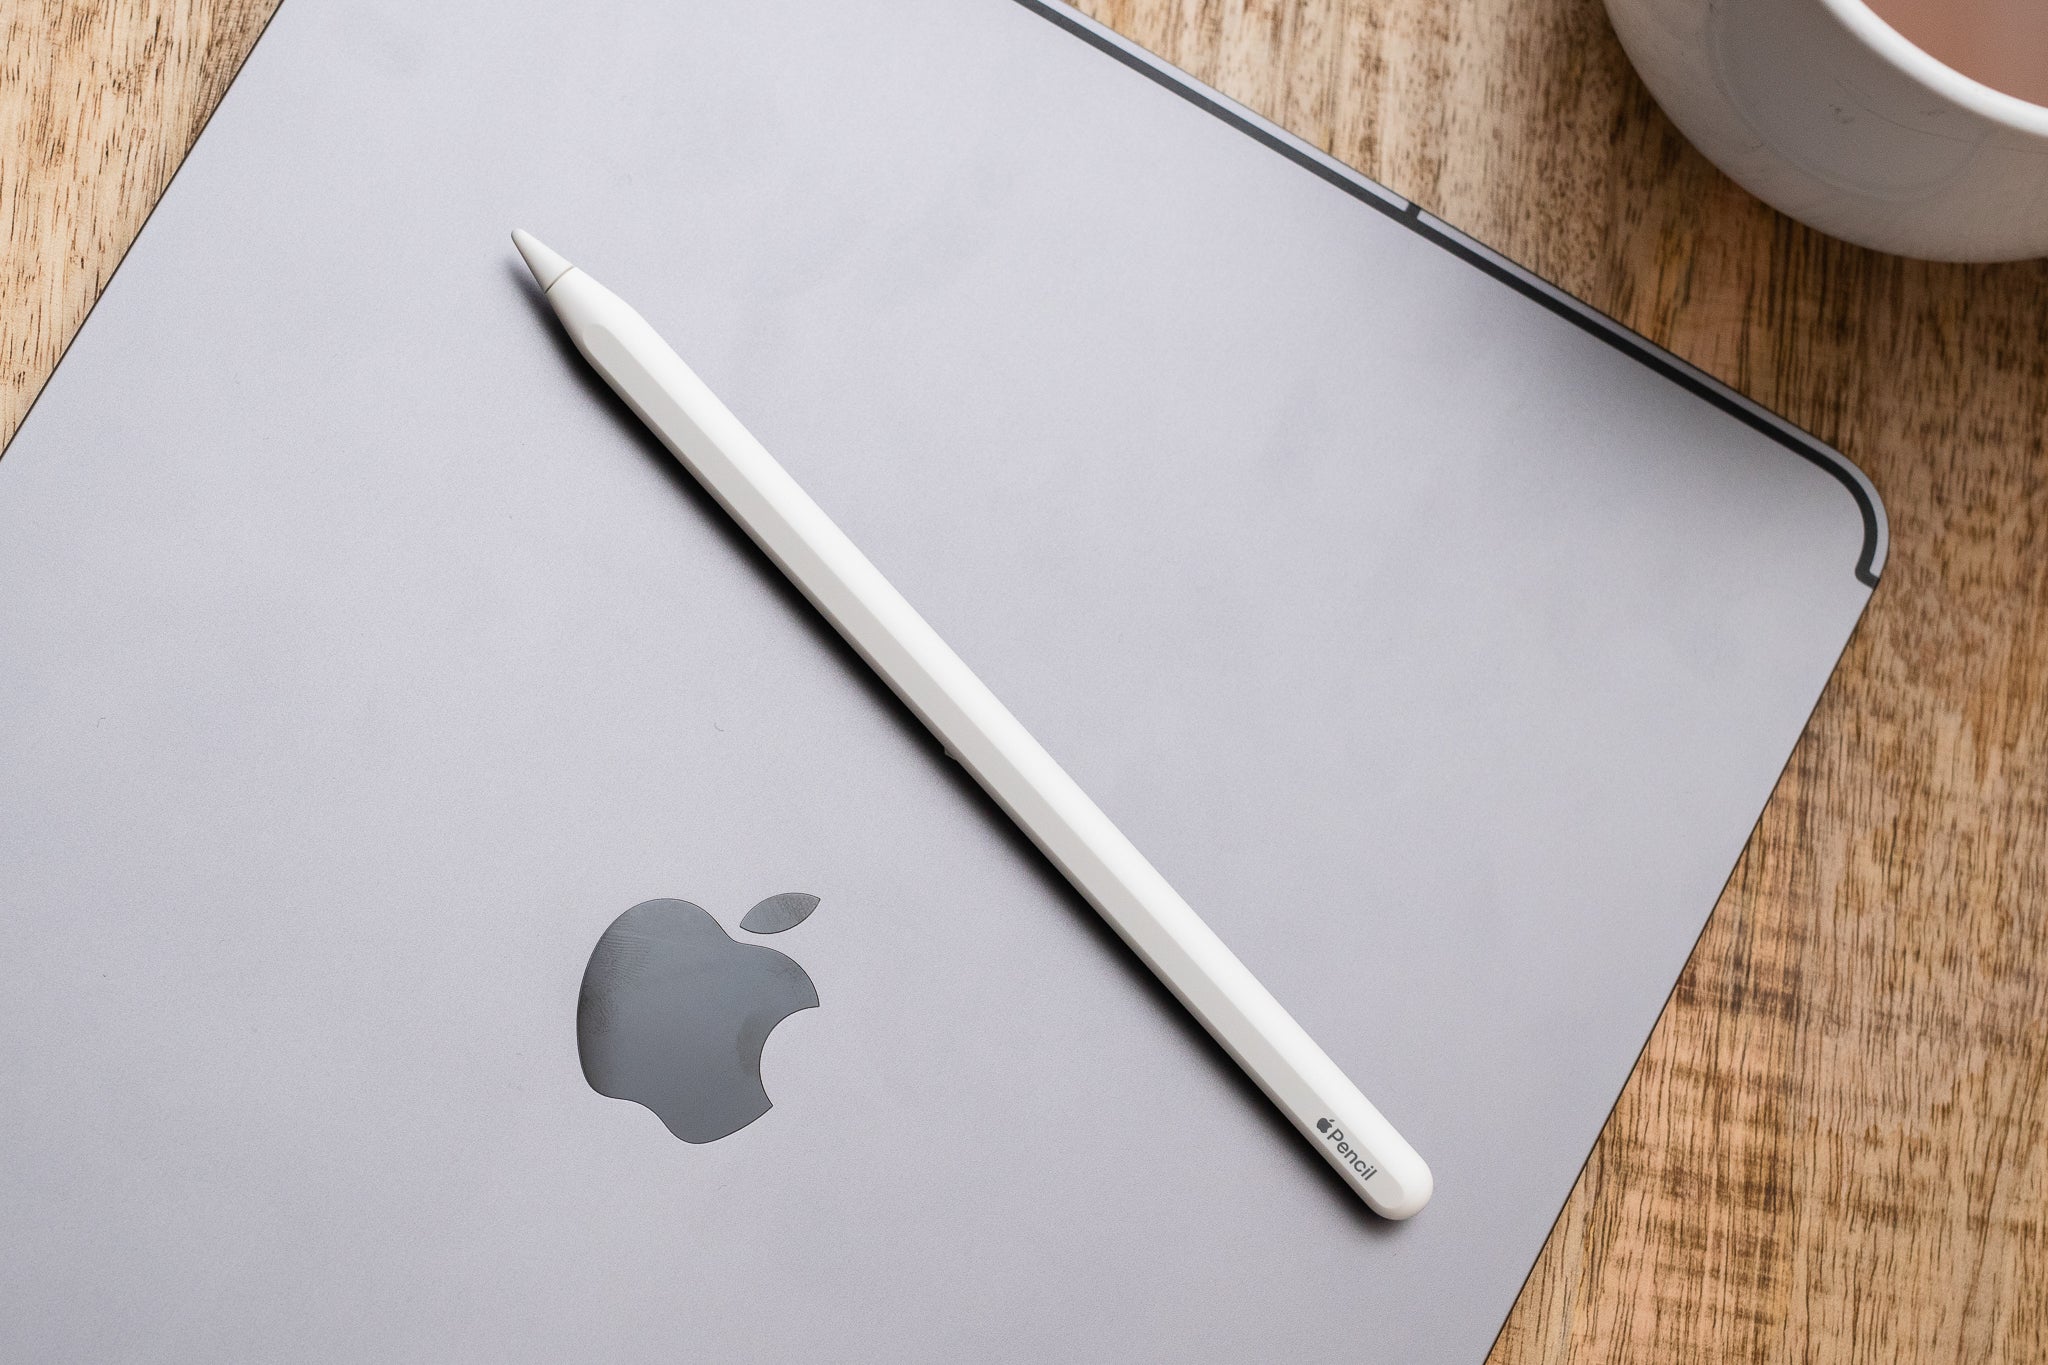 An Apple Pencil, shown on the back of an iPad.